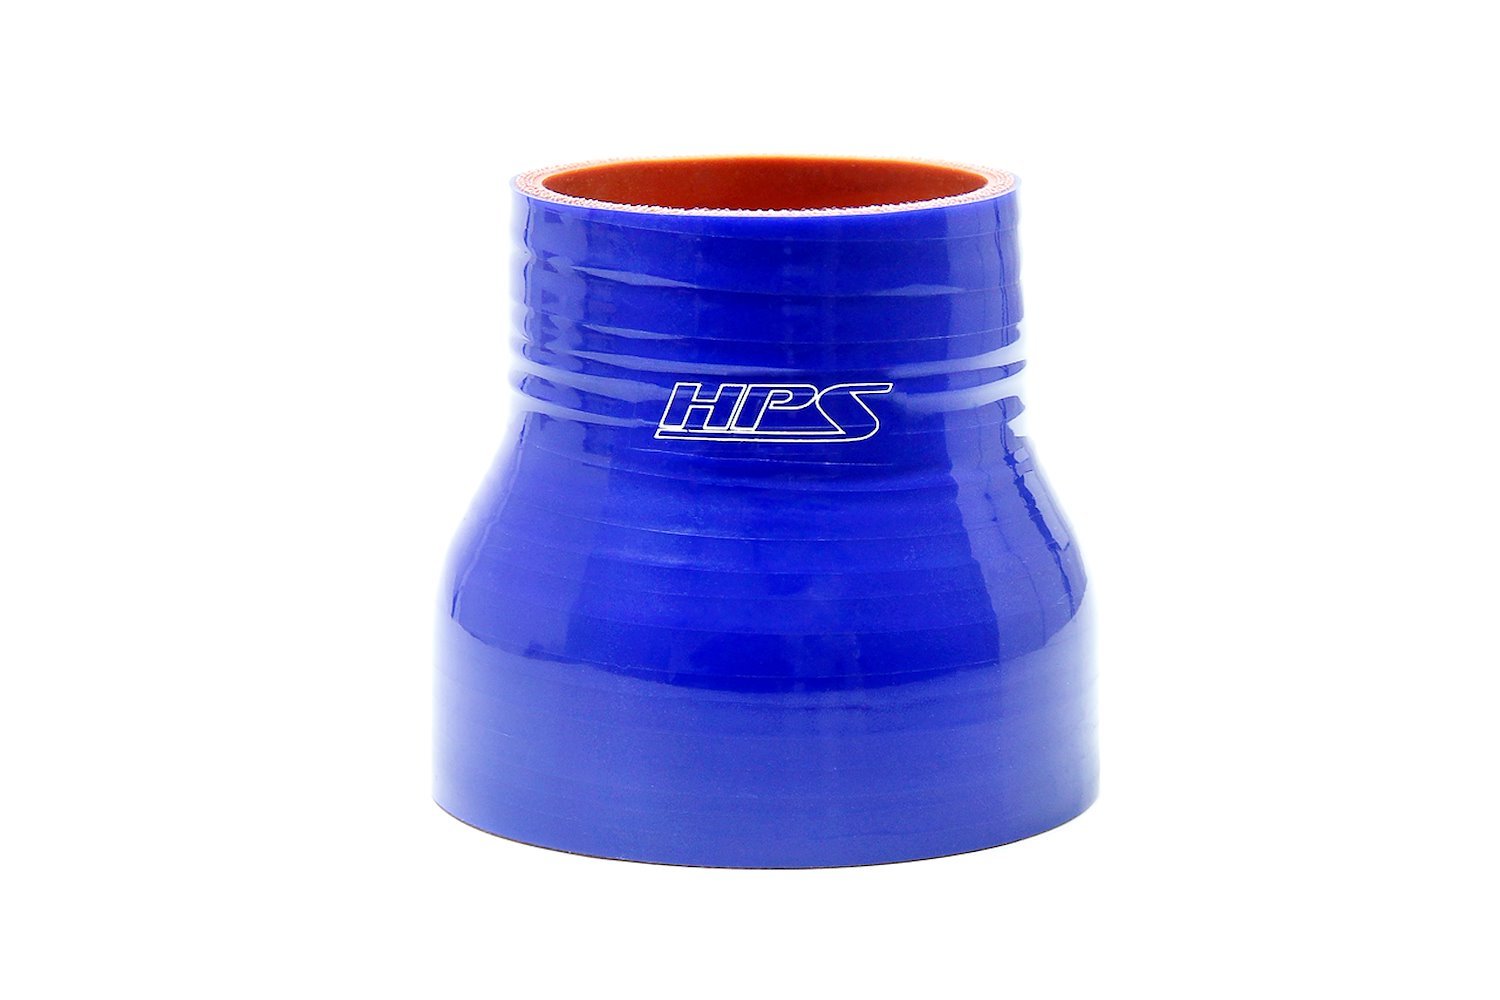 HTSR-300-500-L4-BLUE Silicone Reducer Hose, High-Temp 4-Ply Reinforced, 3 in. - 5 in. ID, 4 in. Long, Blue